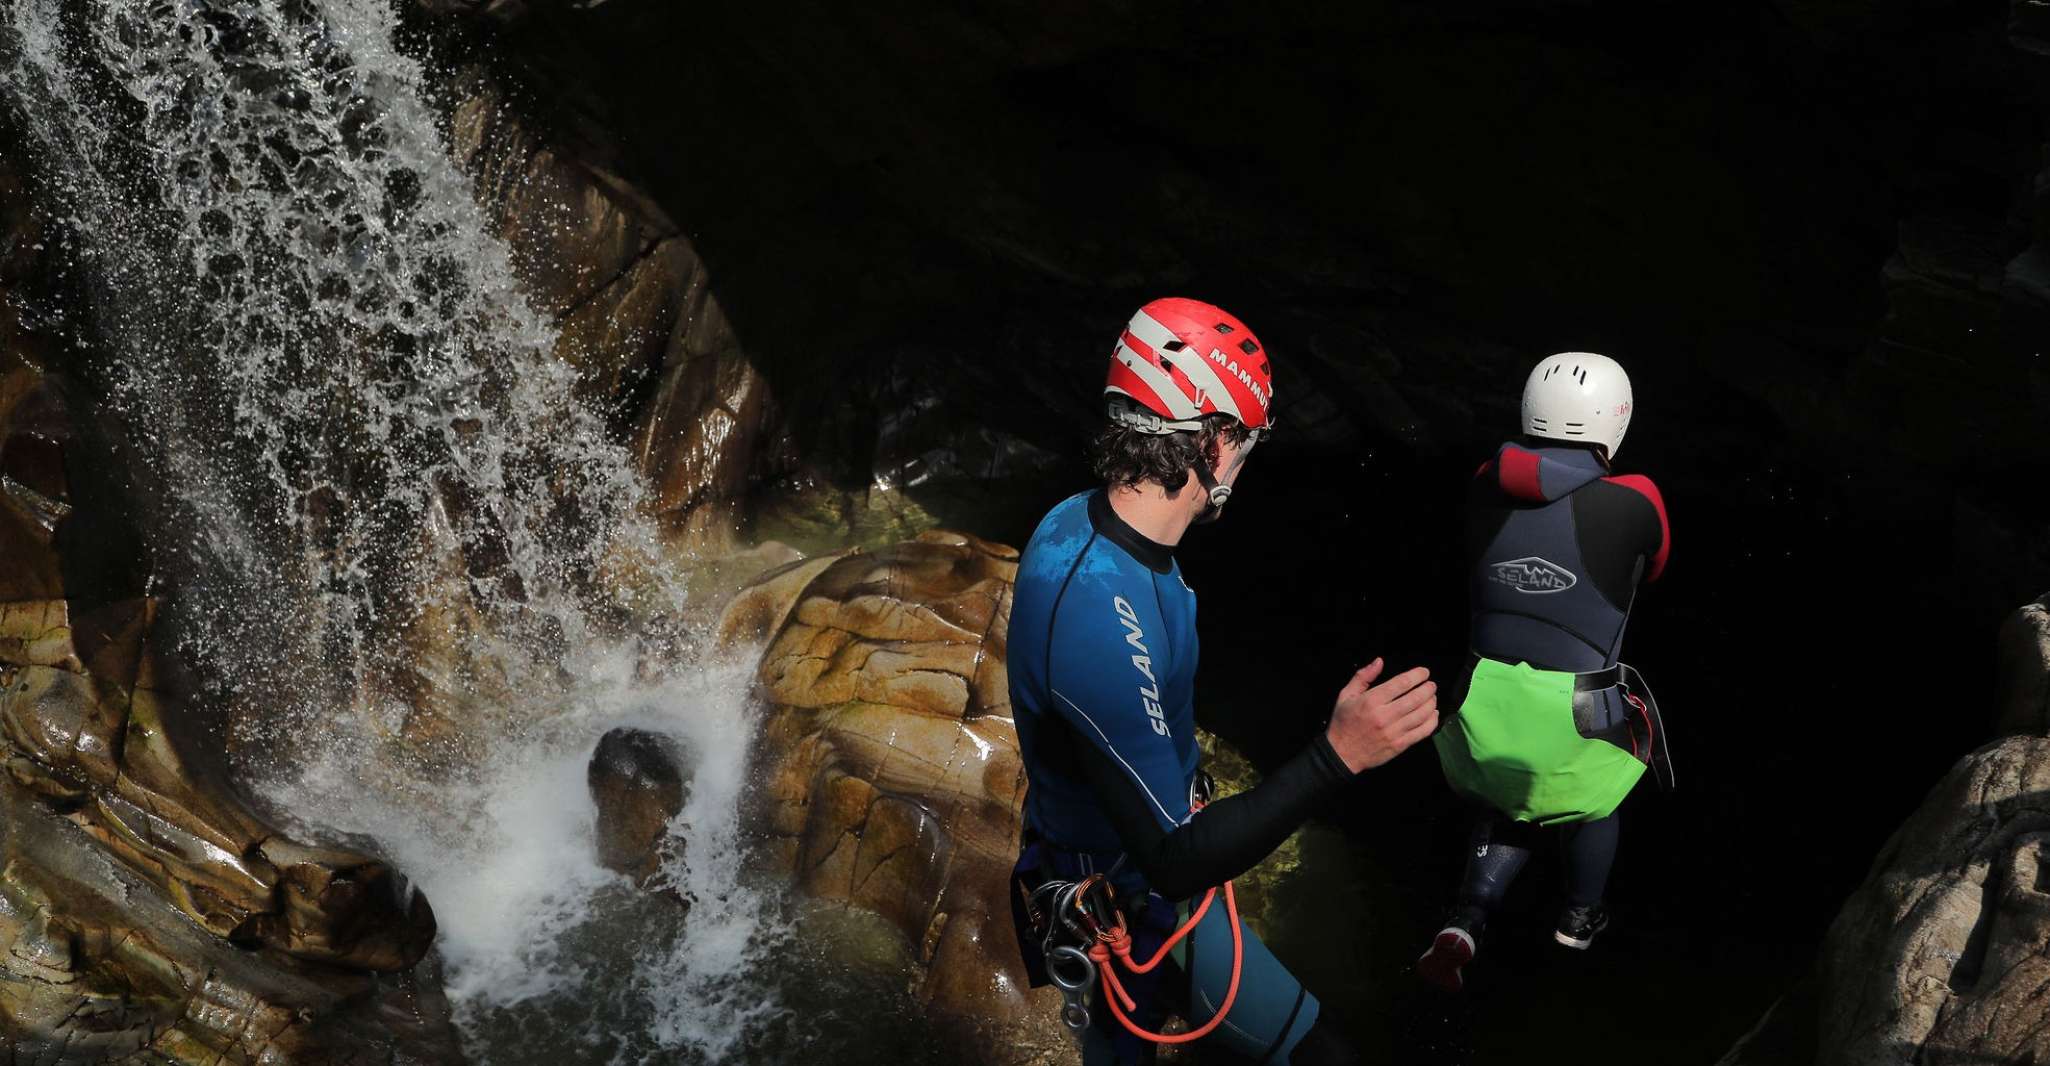 Pitlochry, Advanced Canyoning in the Upper Falls of Bruar - Housity